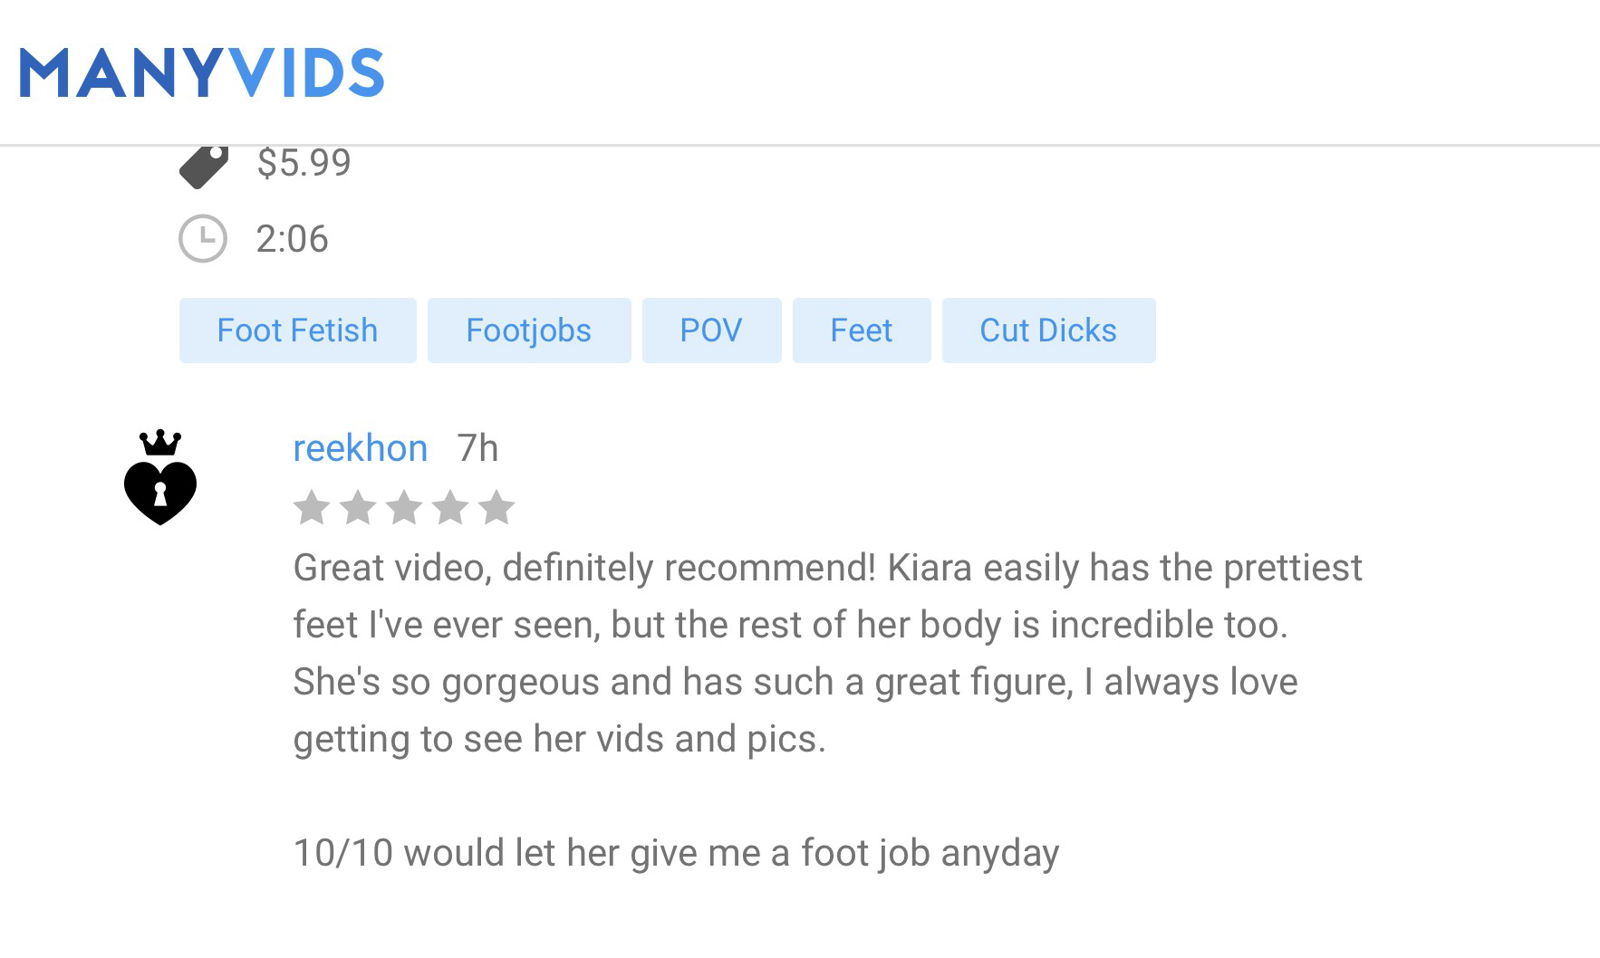 Watch the Photo by Kiara Skye with the username @KiaraSkye, who is a star user, posted on April 3, 2020. The post is about the topic Foot Fetish. and the text says '⭐️New 5 STAR review on this footjob pov vid!🦶

💸Get your copy for just $5.99 - https://www.manyvids.com/Video/1529599/french-pedicure-footjob-pov/ 

#footjob #pov #feet #footfetish #pedicure #cheap #amateur #foot #fj #soles #toes #brunette #thick'